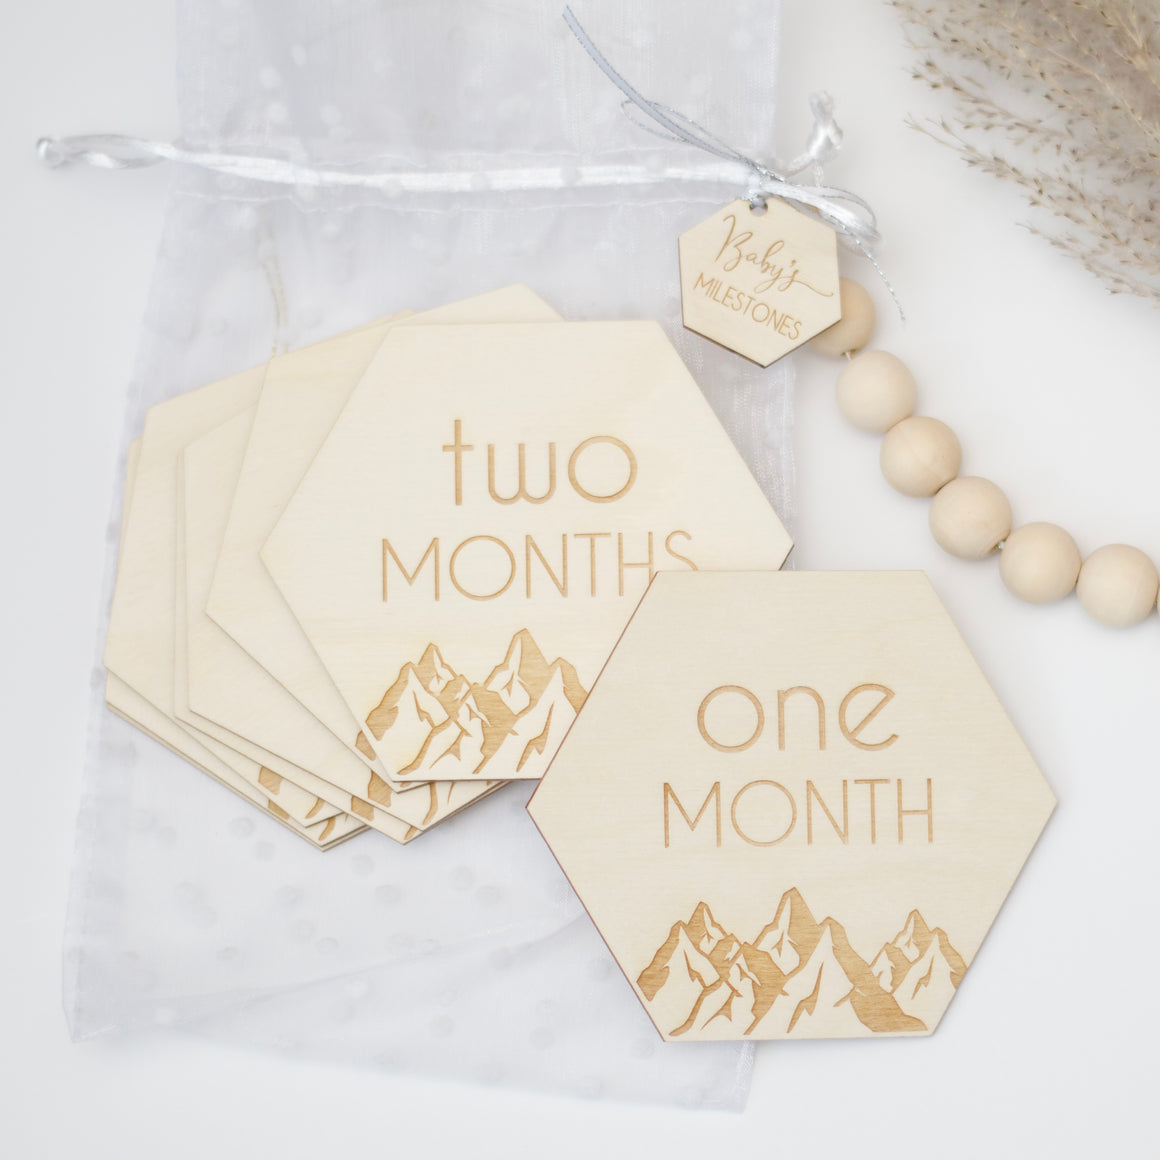 Hexagon shaped wooden milestone signs. One month, two months. Displayed on a white table with wooden beads and plants